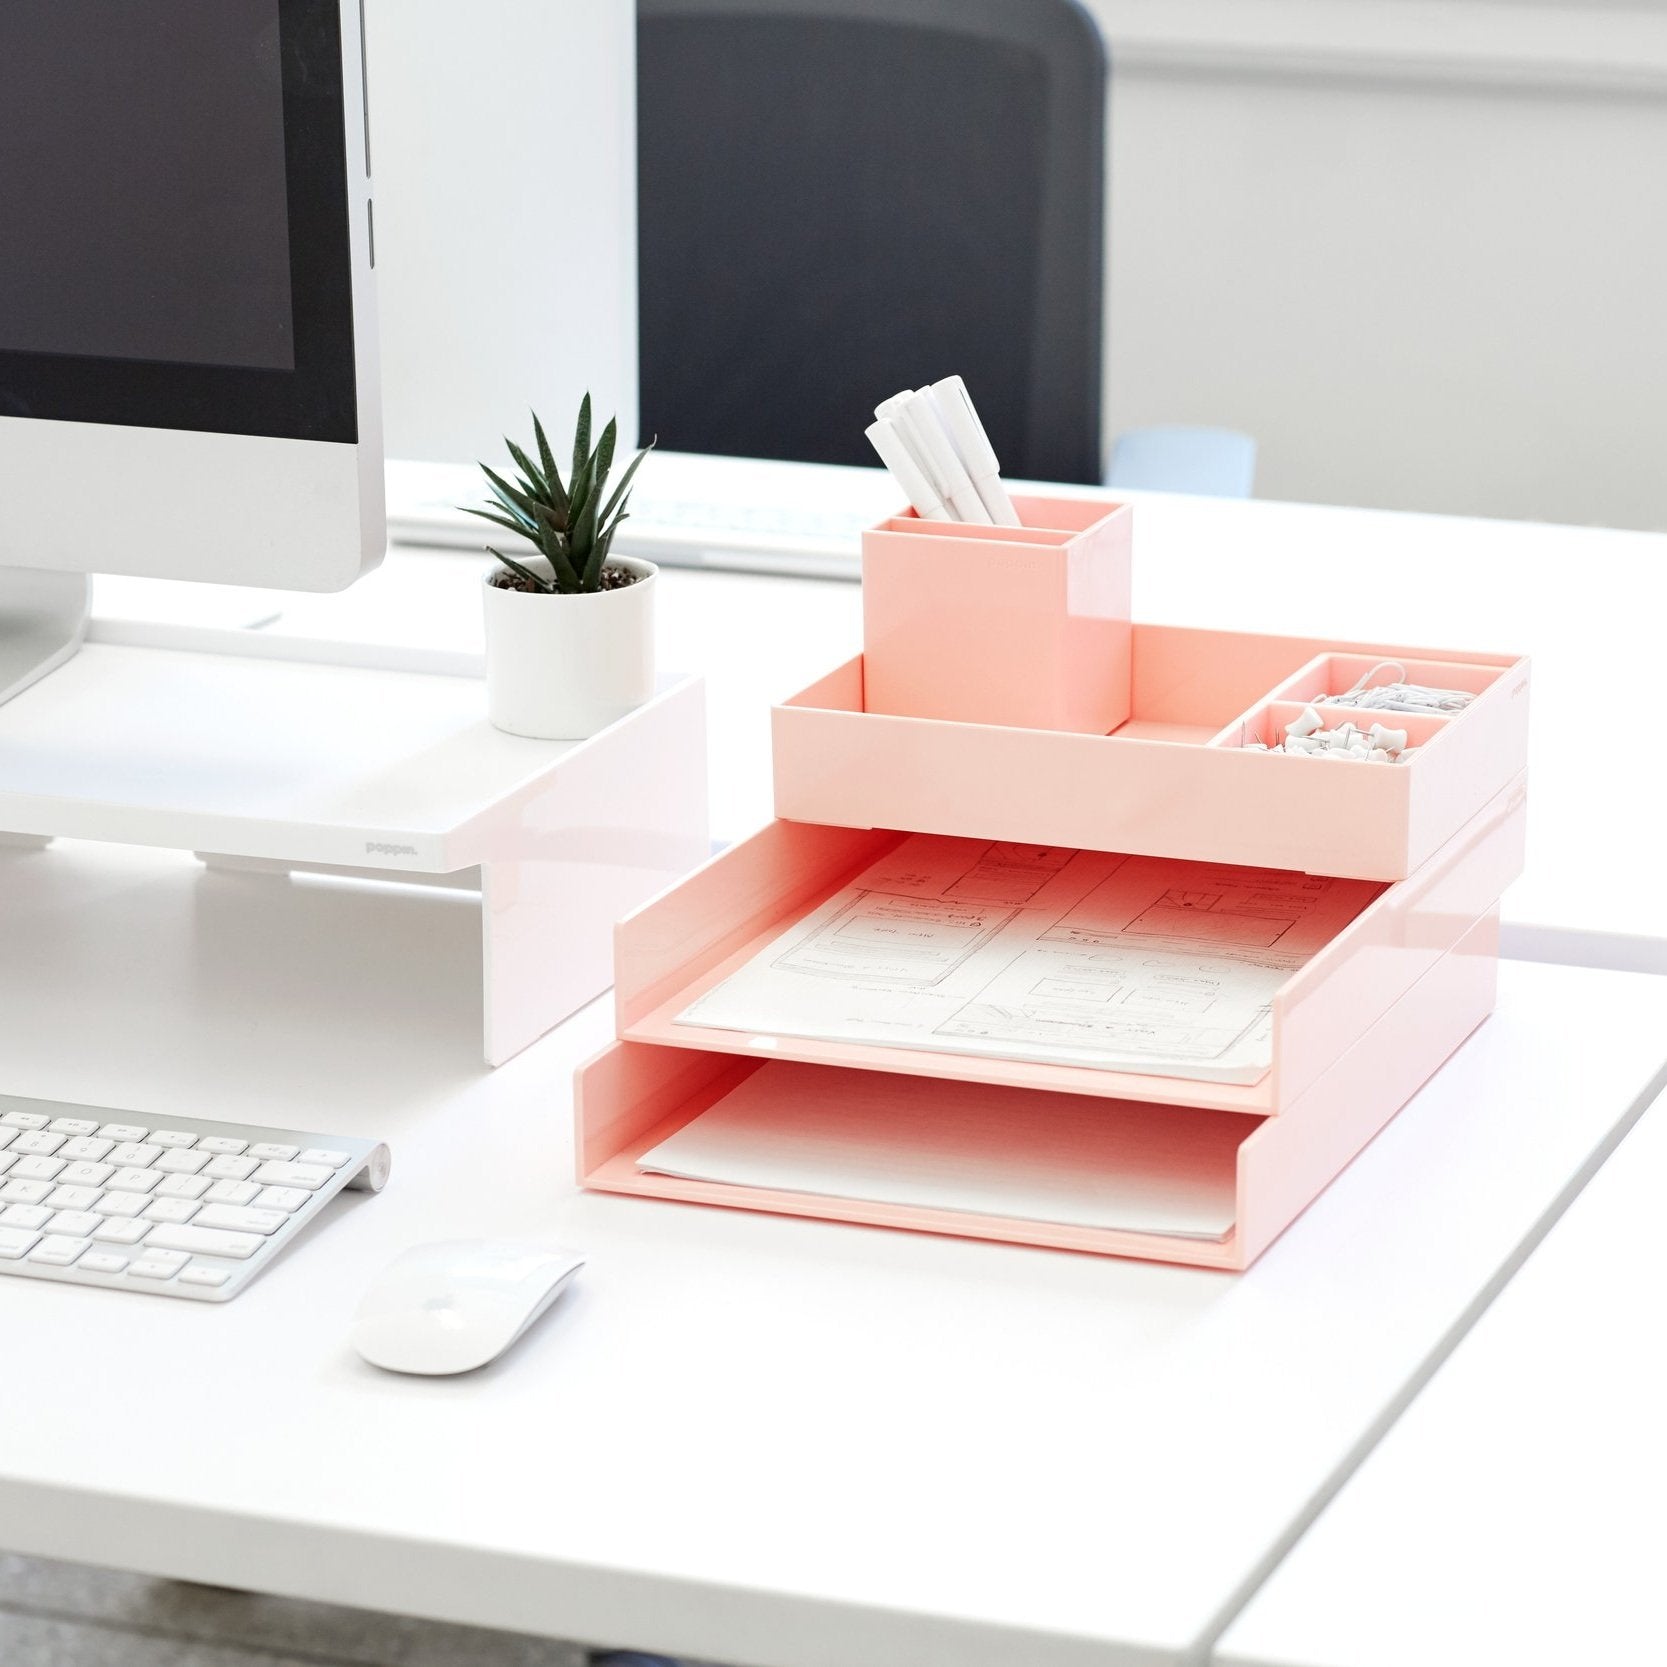 Here's How to Make Your Office Desk As Aesthetic As Your WFH Desk